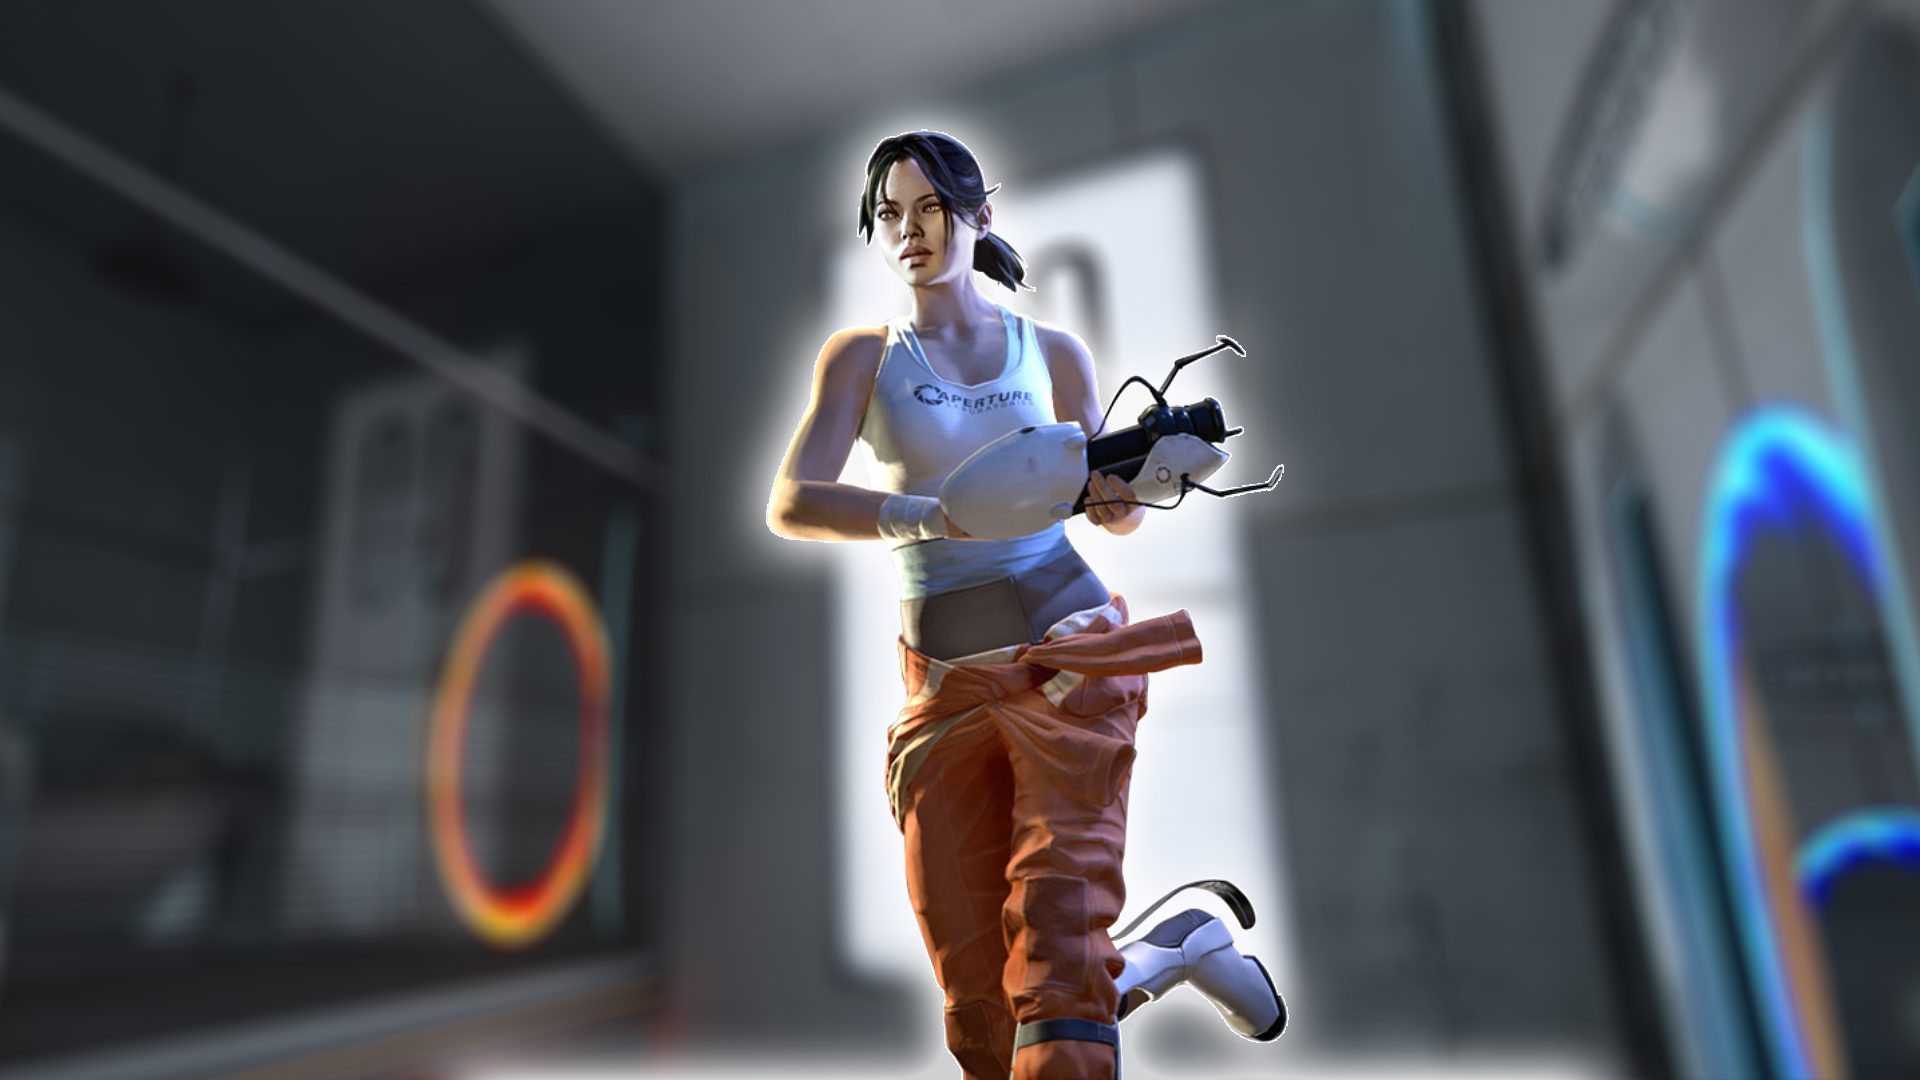 Portal with RTX system requirements – recent Nvidia GPU required